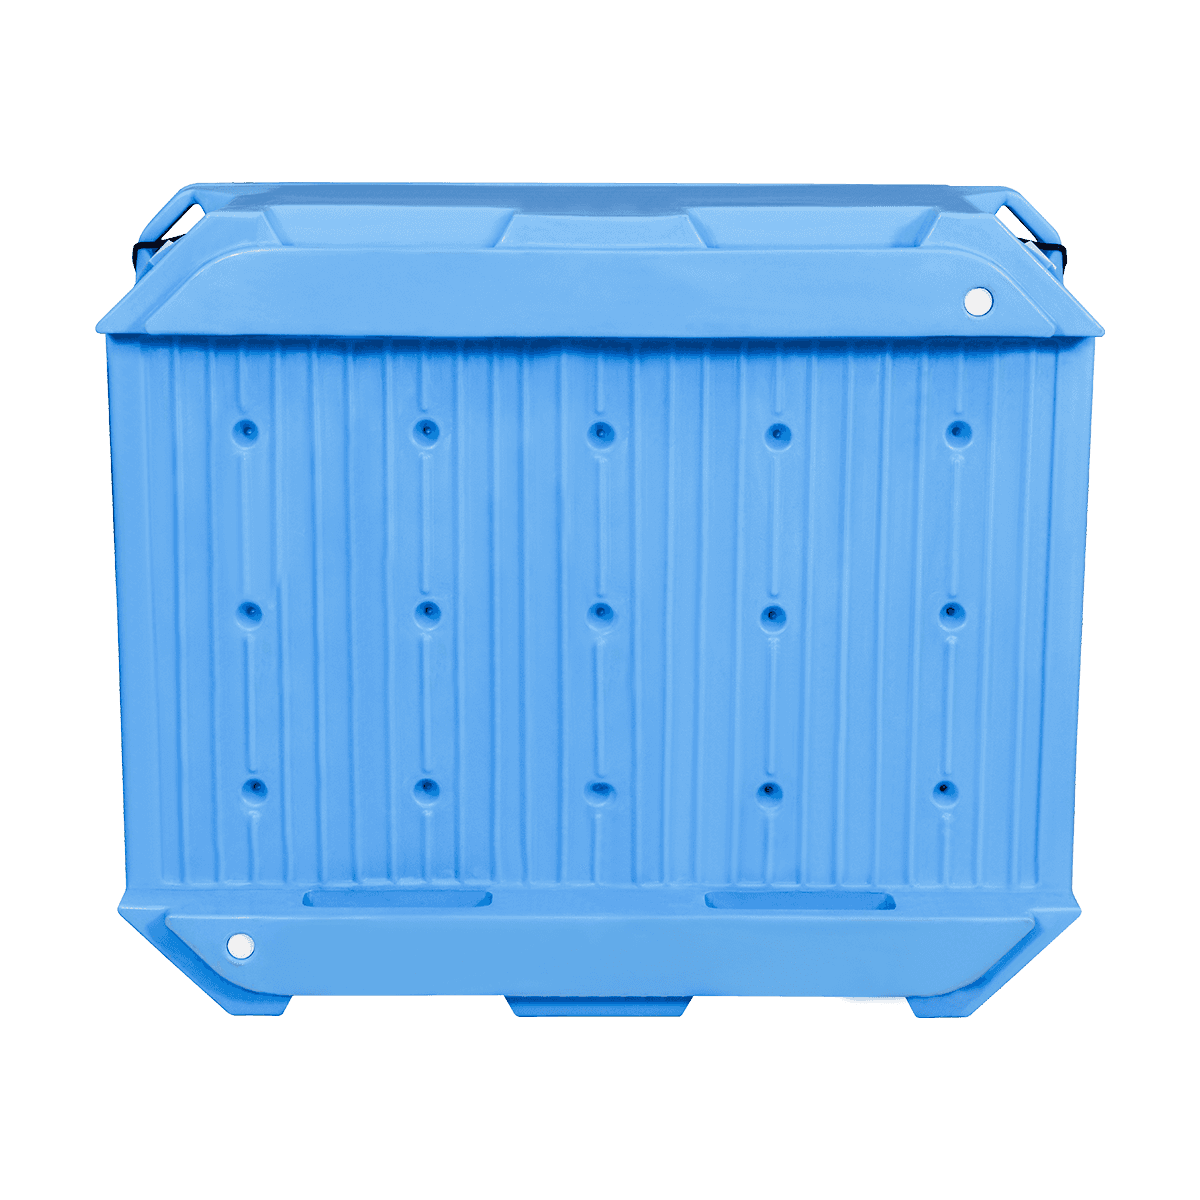 AF-340L Seafood Bins Seafood Industrial Use Plastic Containers